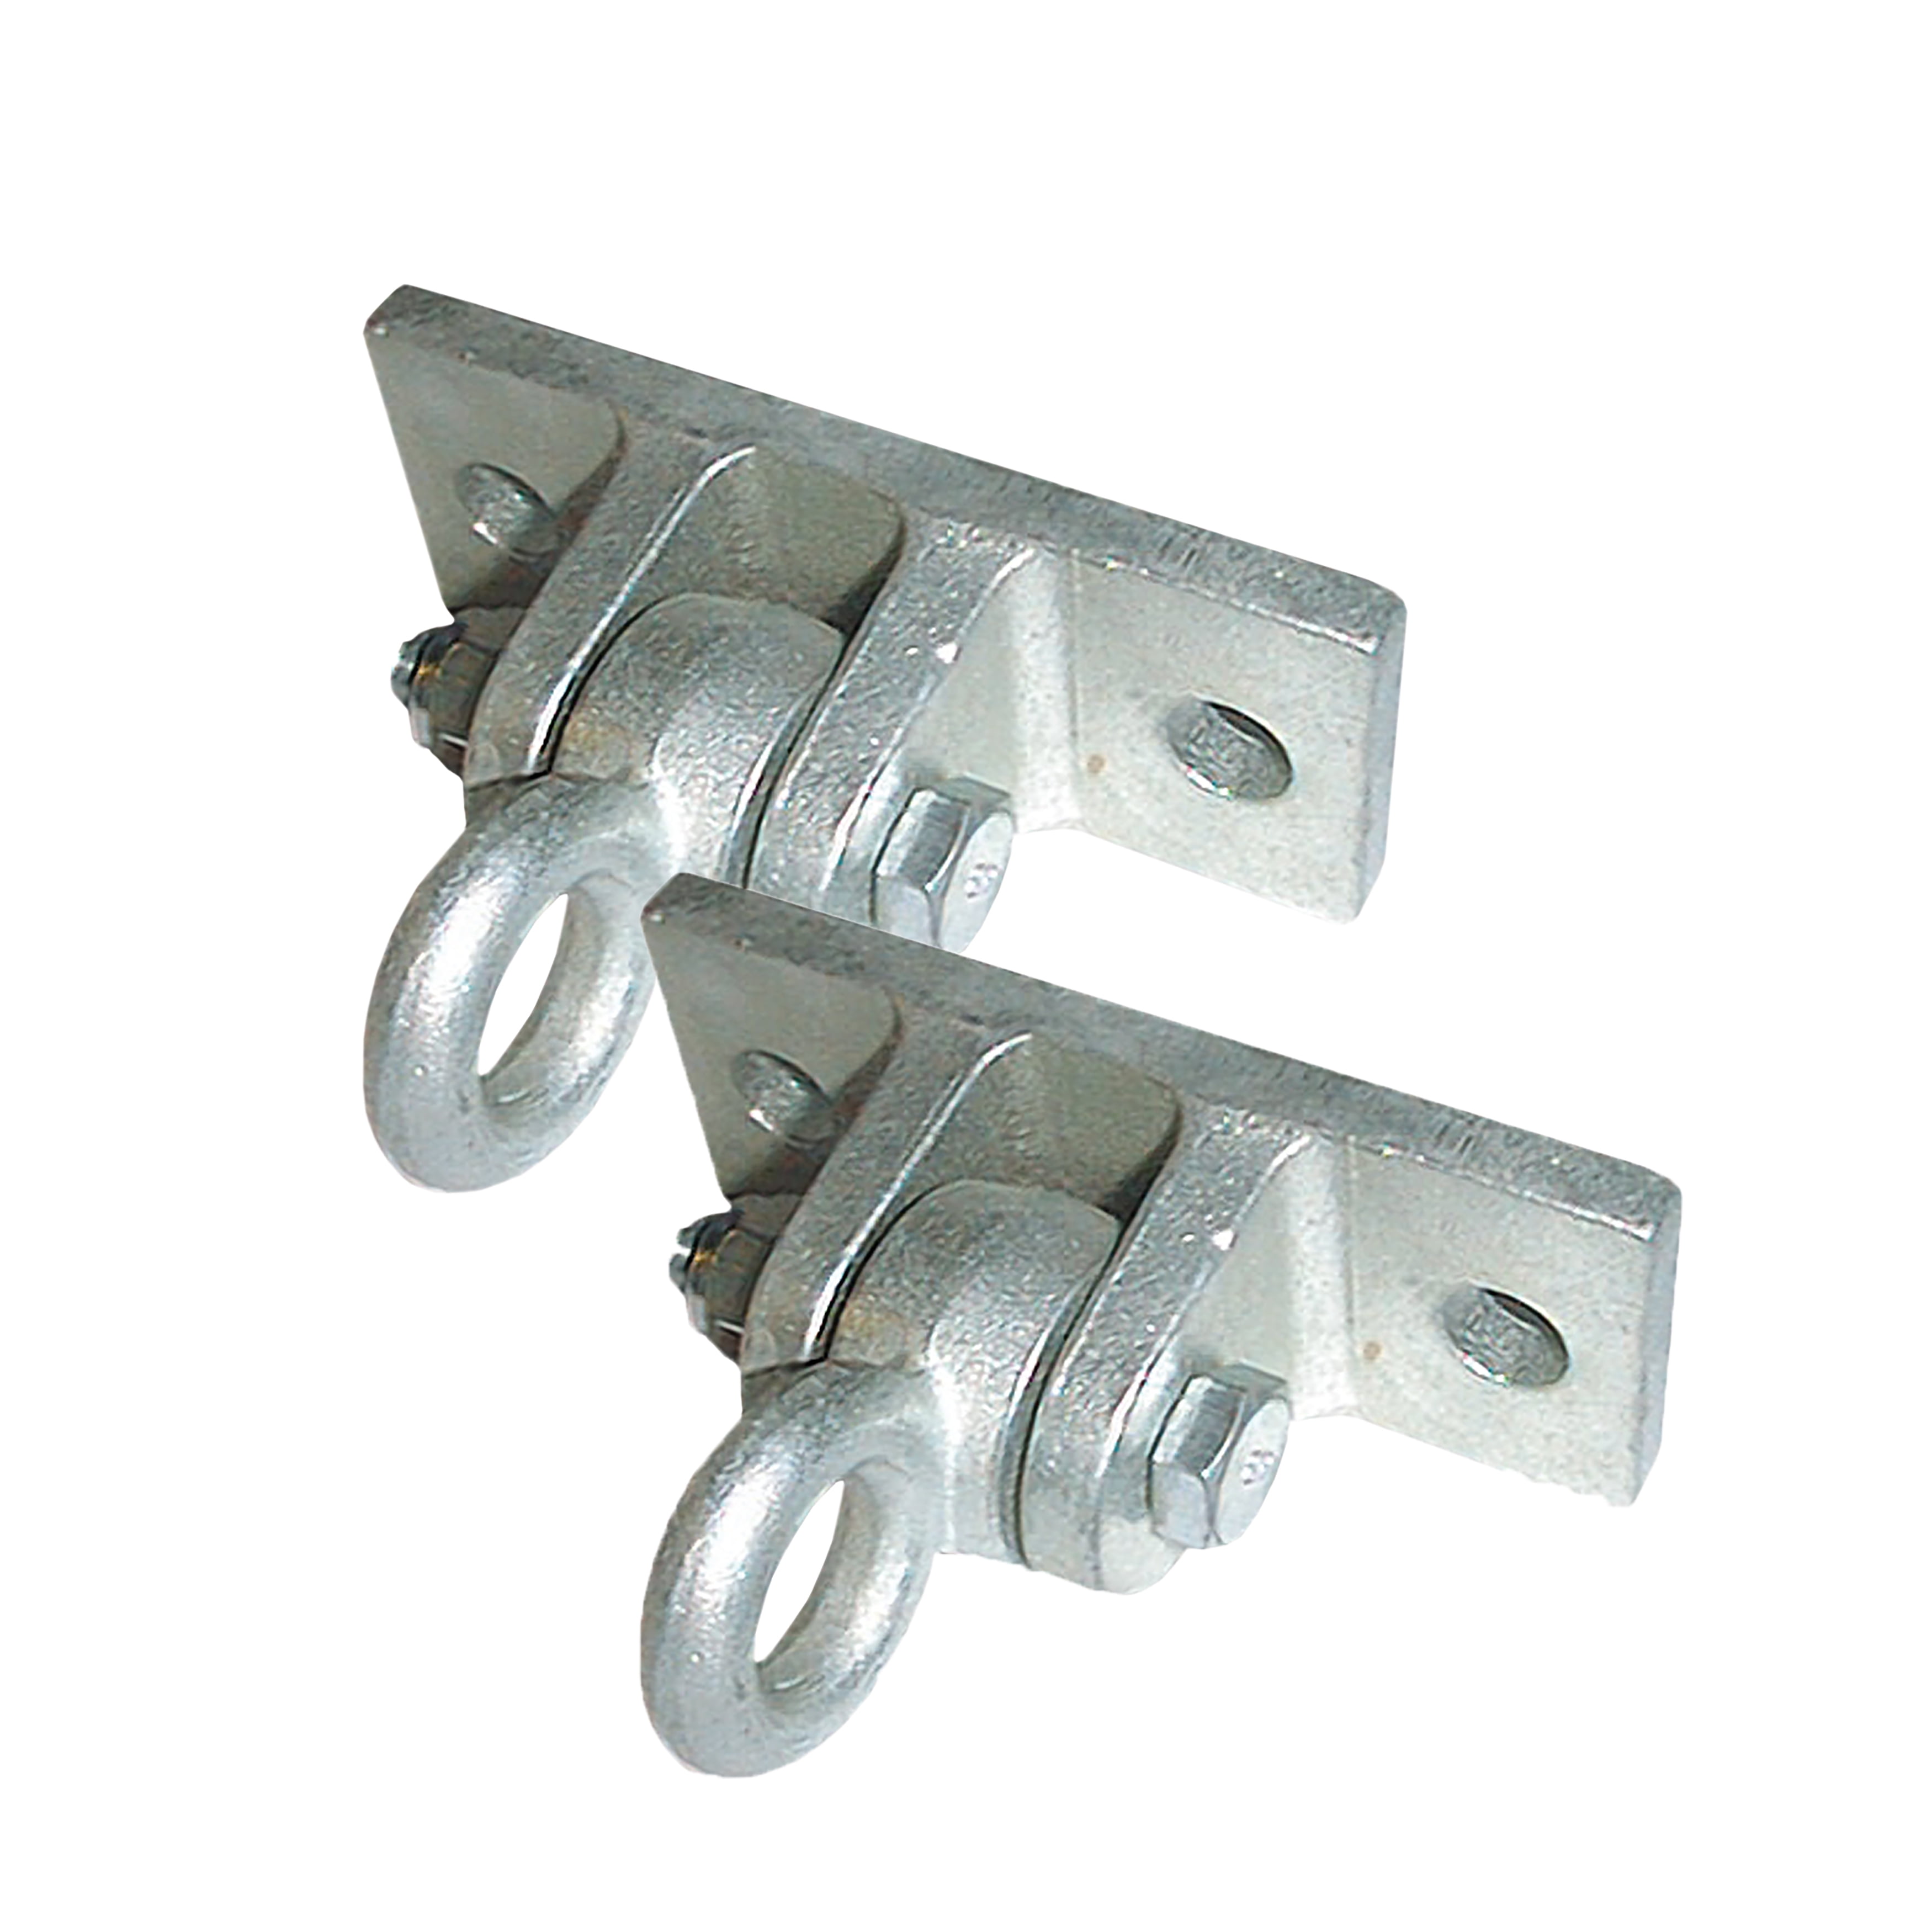 Swing Set Stuff Inc. 3/8 inch x 4 inch Swing Hanger with Spring Clip Pair